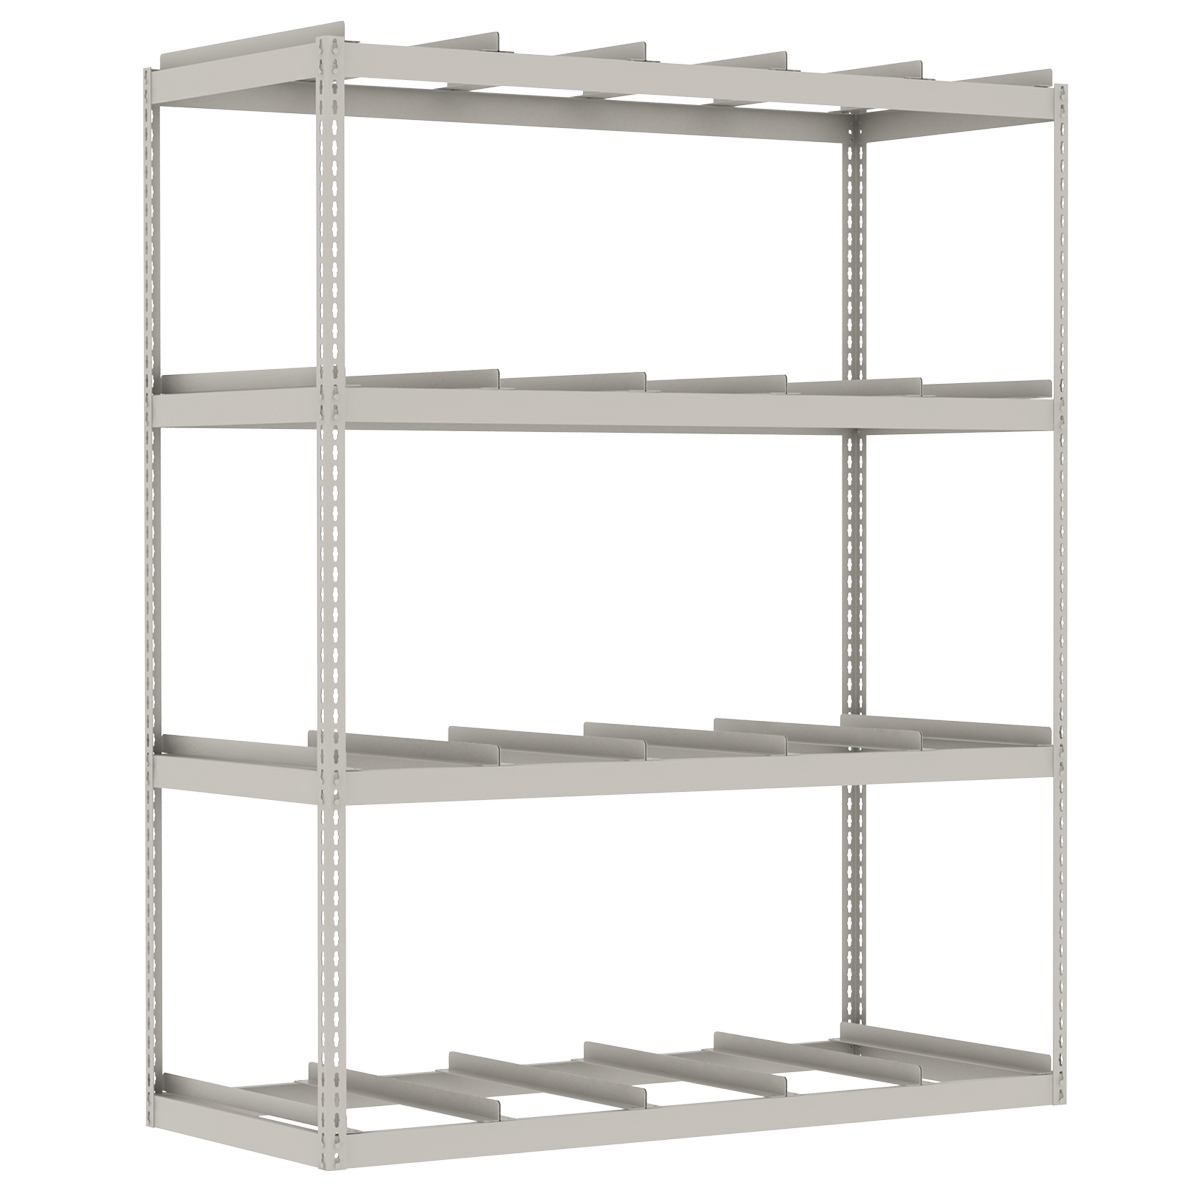 rivet span specialty shelving units icon